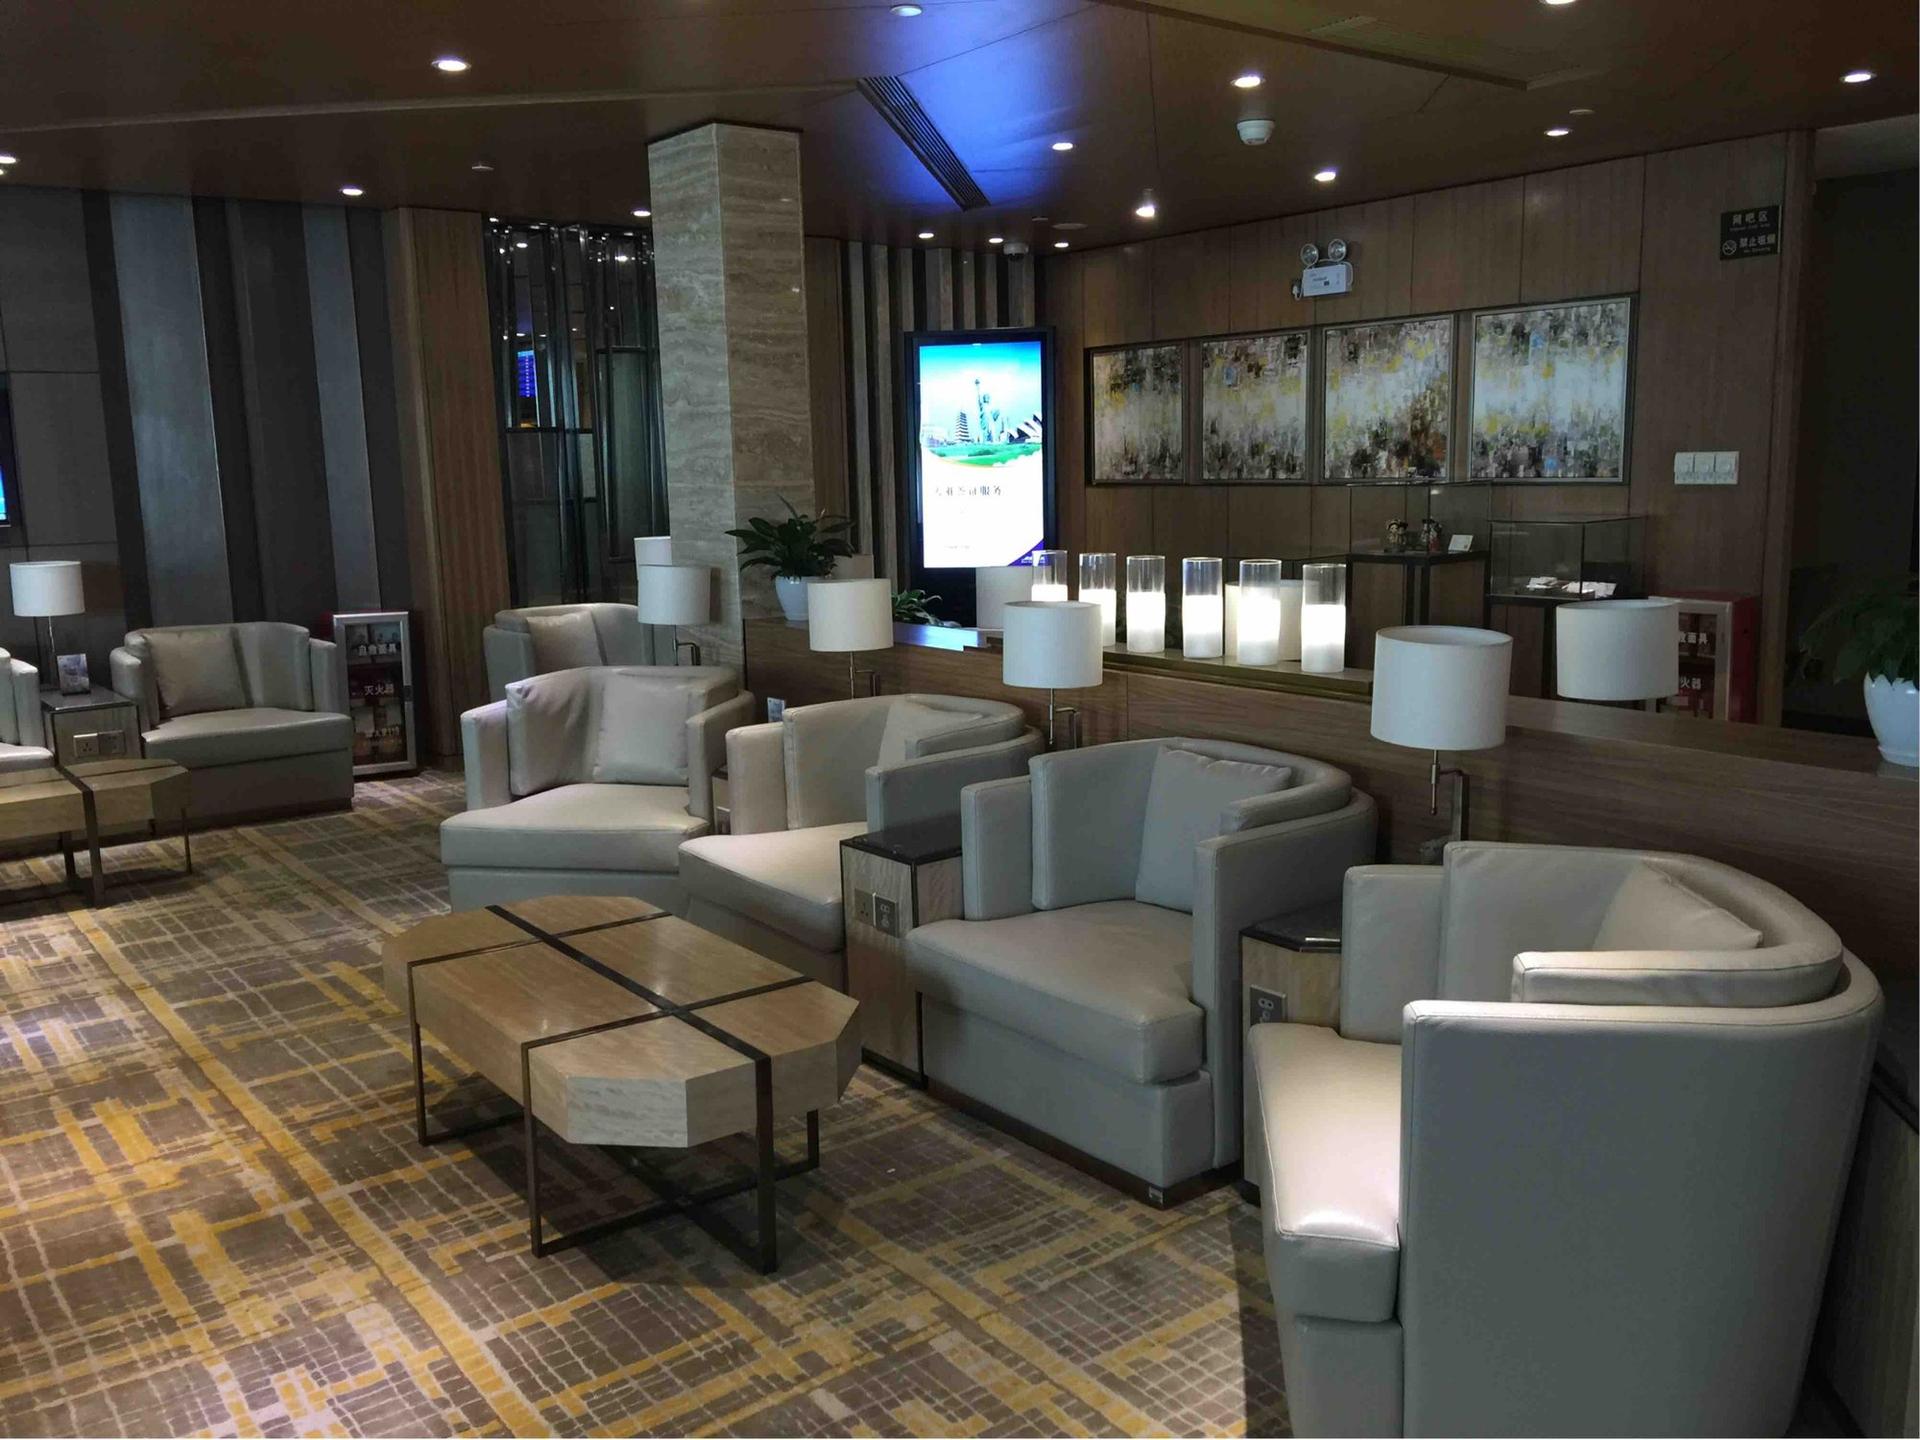 Baiyun Airport First Class Lounge (Closed For Renovation) image 1 of 10